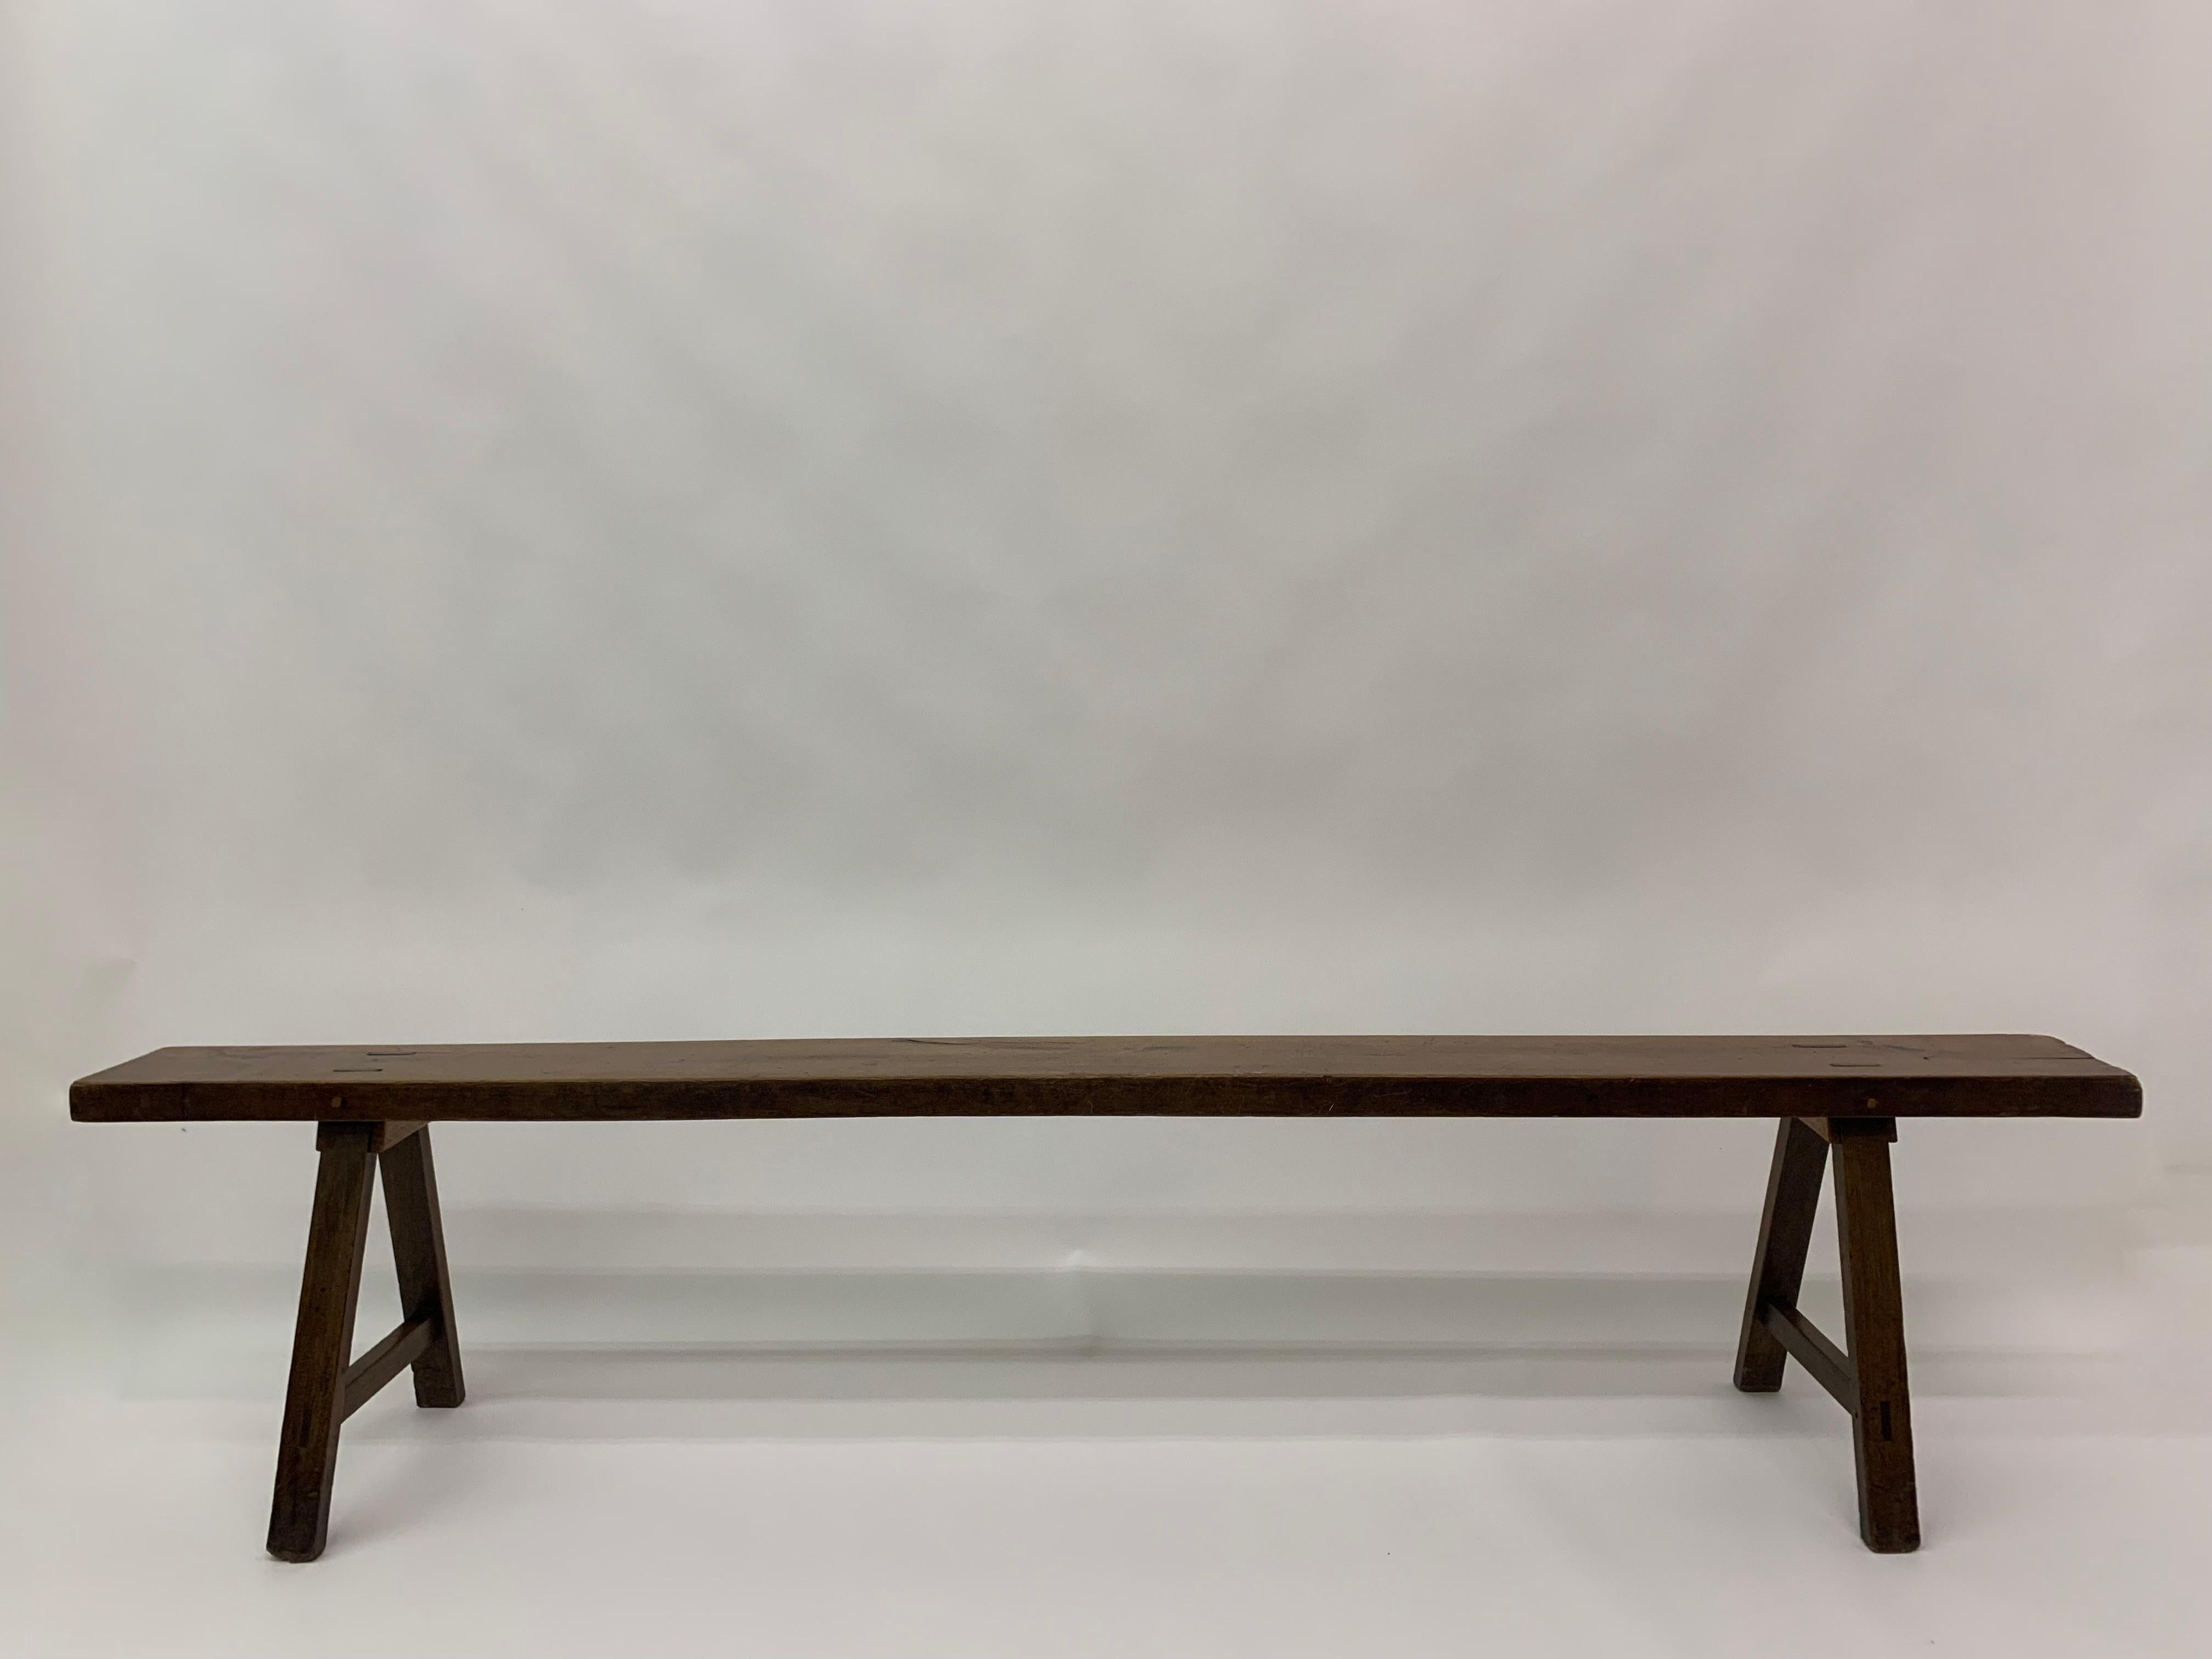 Beautiful solid wooden bench. This bench is in a great condition the patina is very nice.